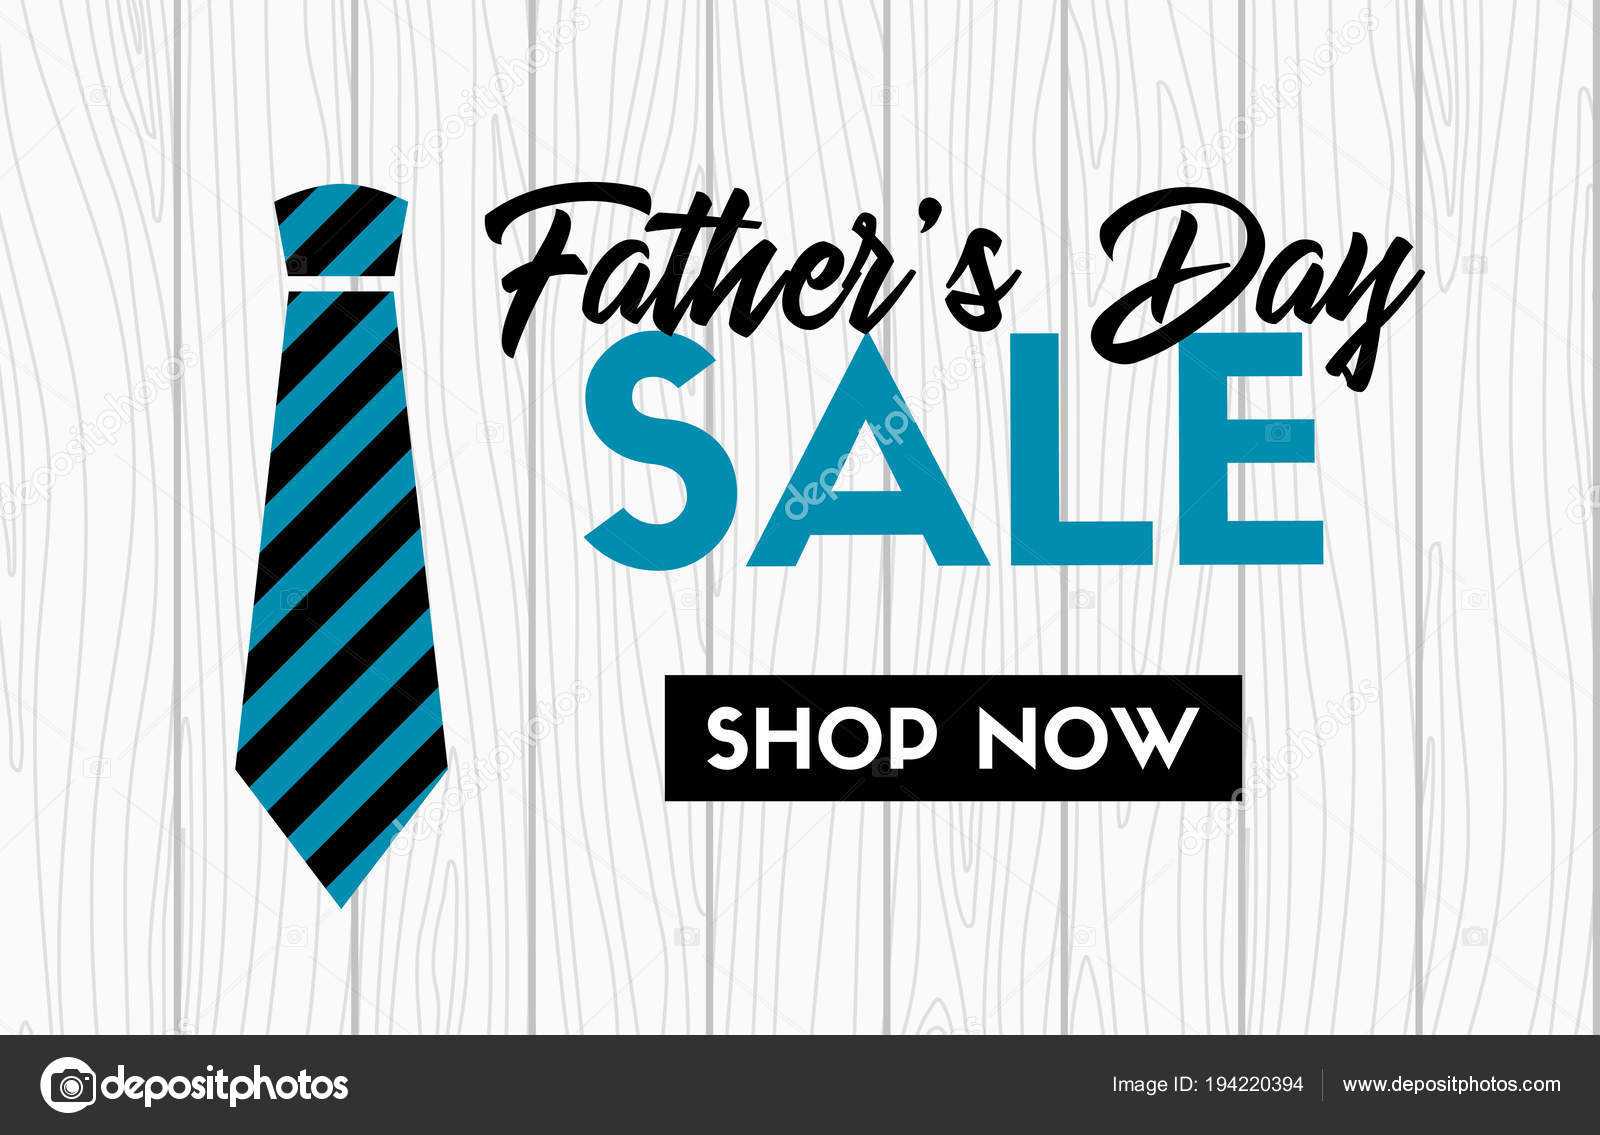 Fathers Day Sale Vector Banner With Necktie. Web Promotional With Tie Banner Template